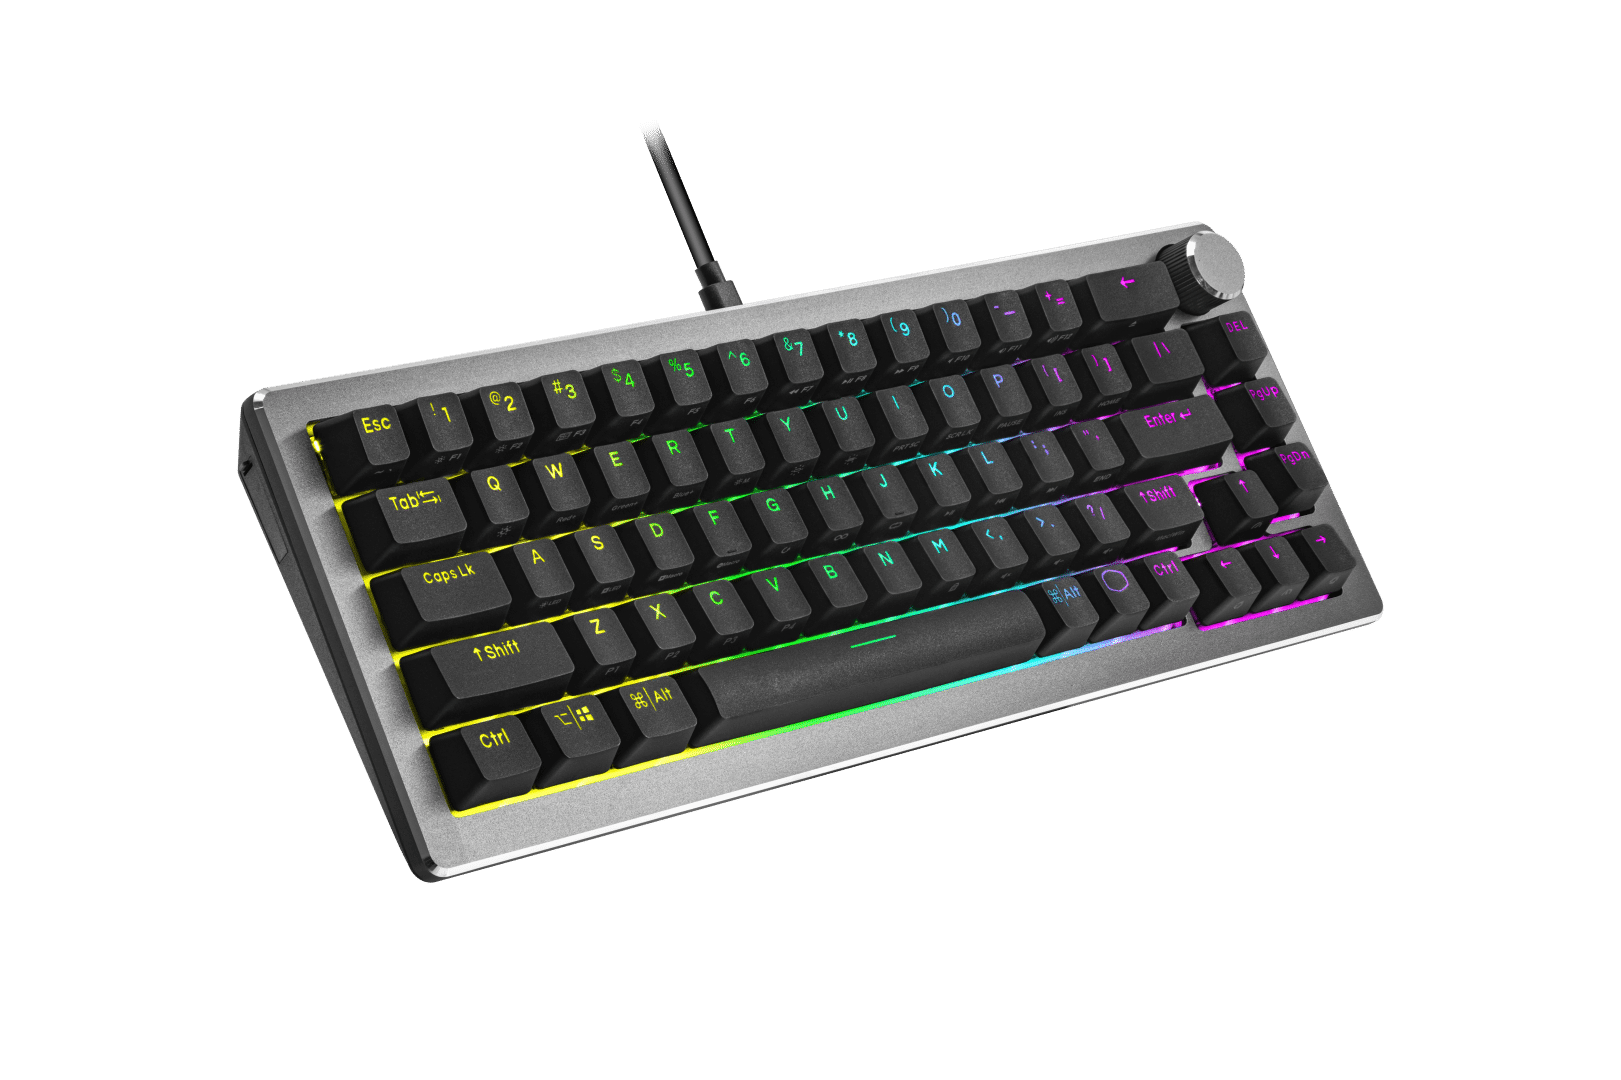 Cooler Master Joins The Custom Keyboard Game With CK720 65% Mechanical Keyboard